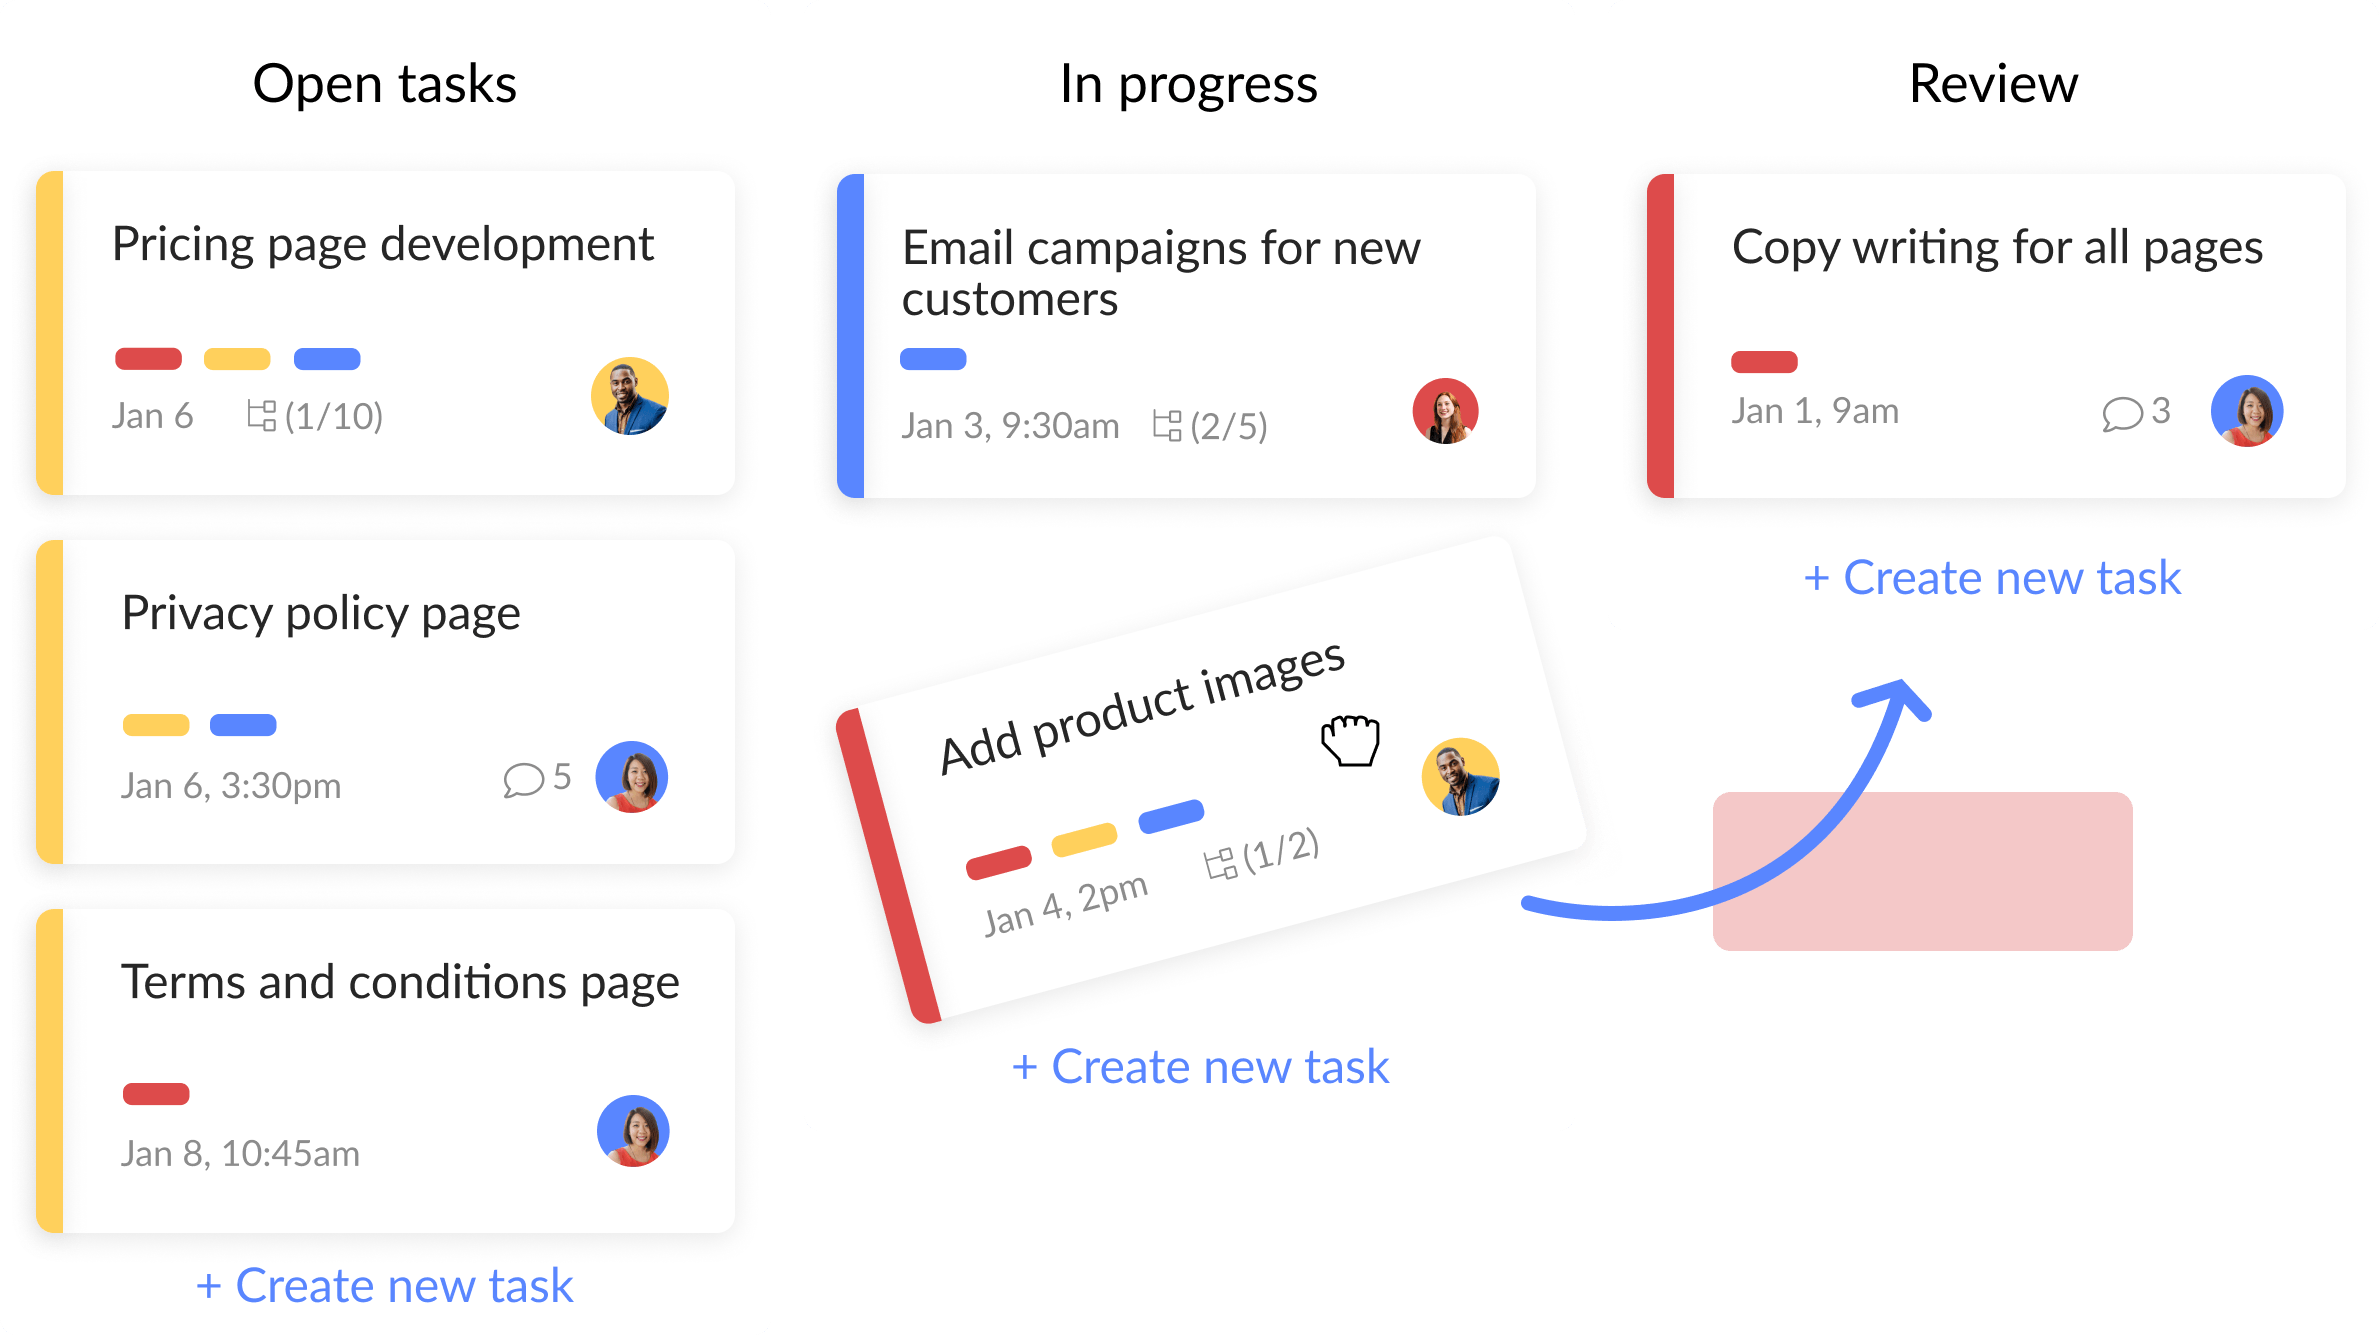 Plan, deploy and complete any project or task